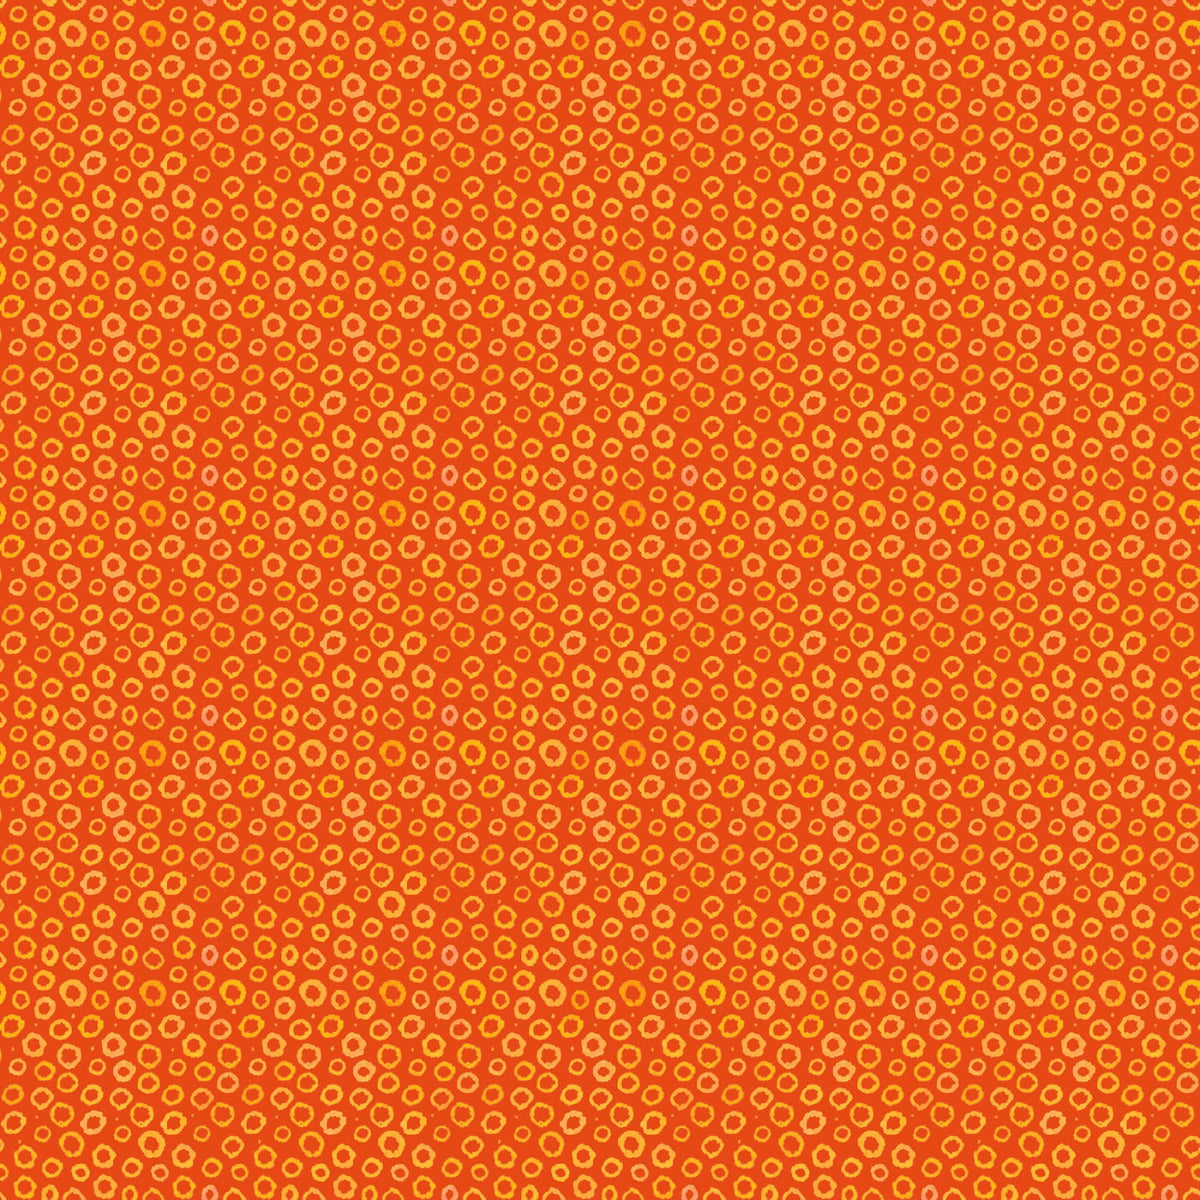 Zooville Quilt Fabric - Aloha Dot in Orange - FLZS D114 O